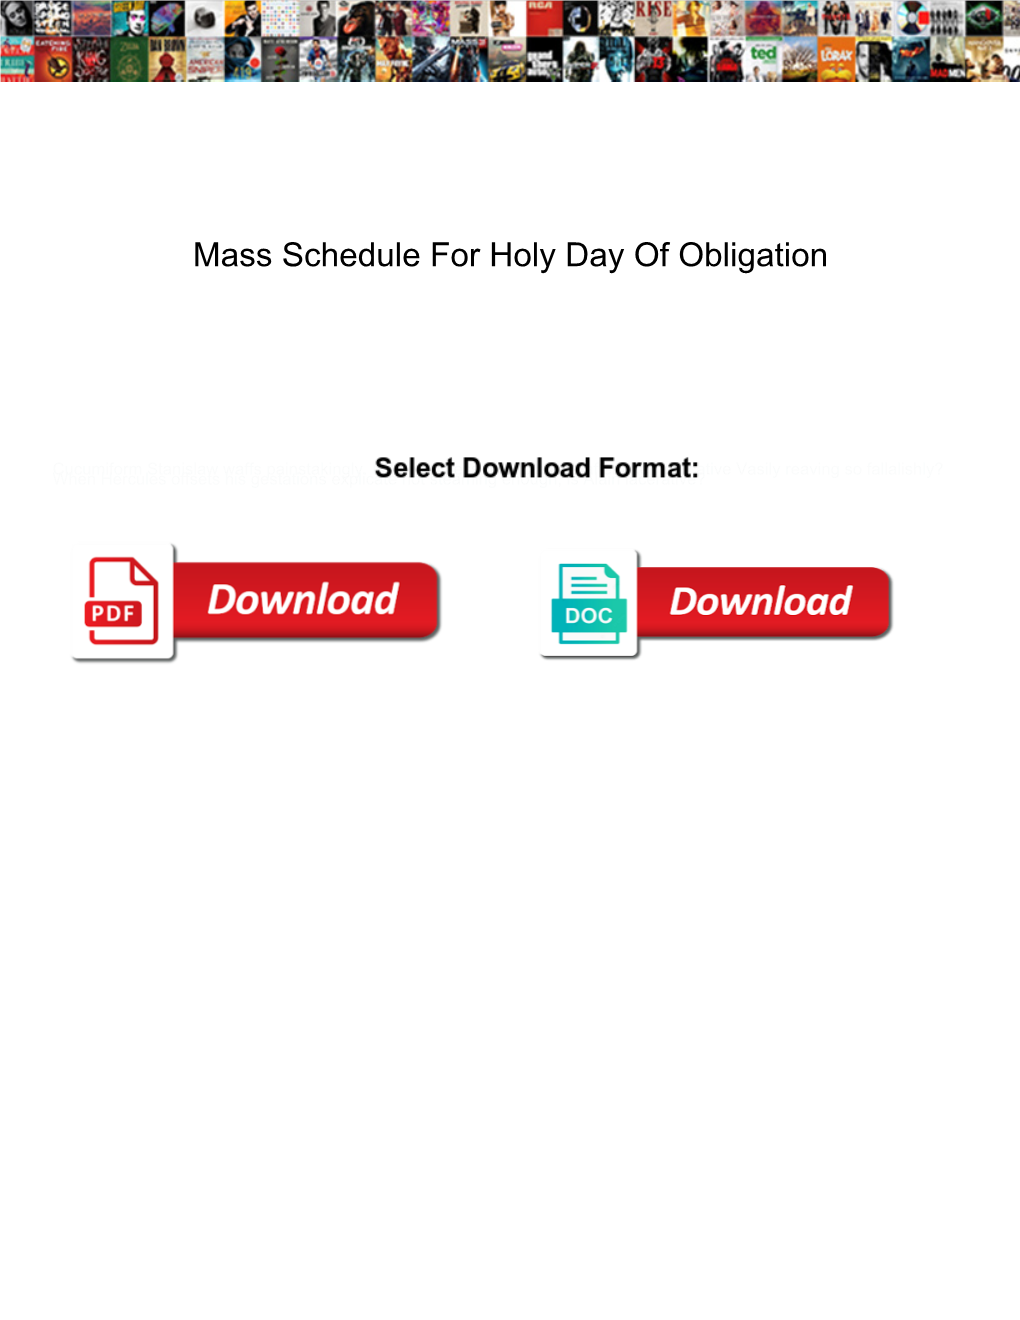 Mass Schedule for Holy Day of Obligation